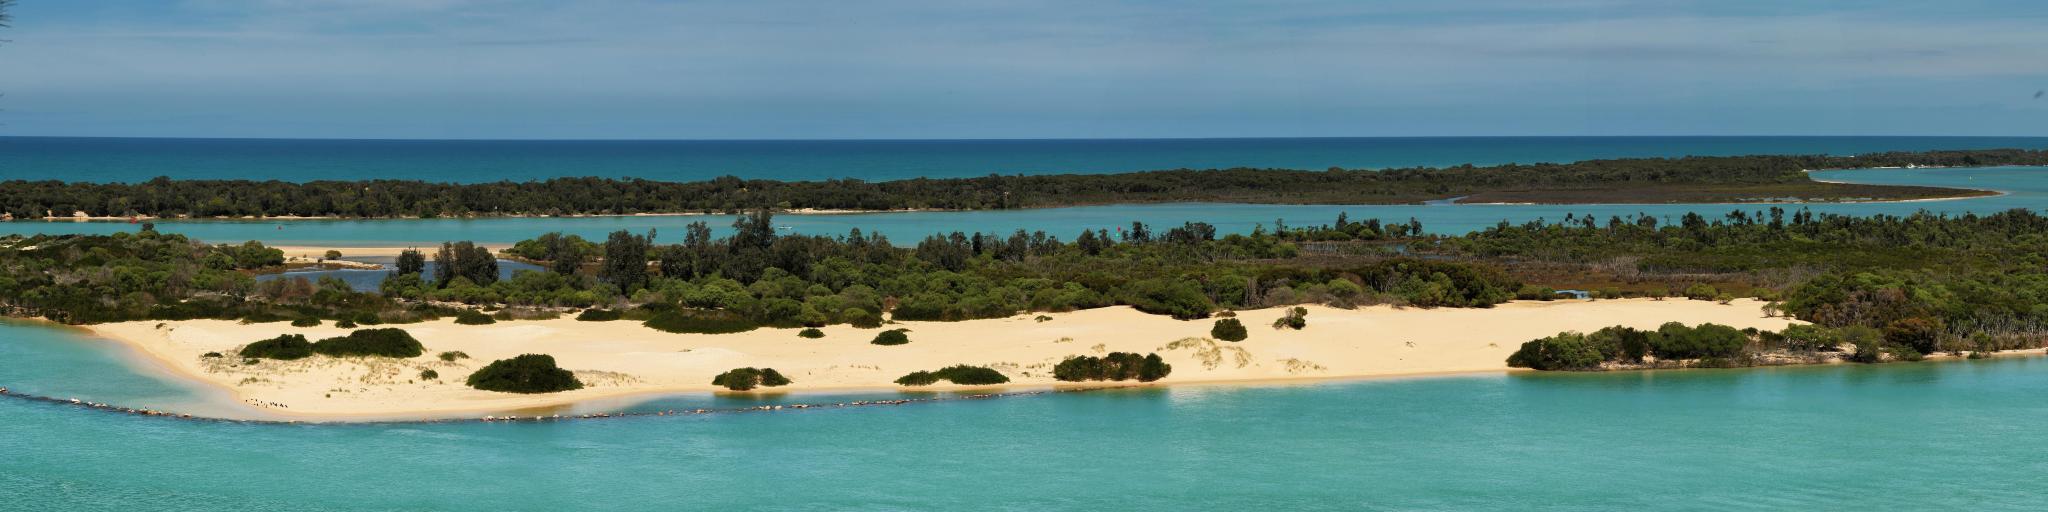 Panorama of turquoise water and white sand beaches at Lake Entrance, Australia